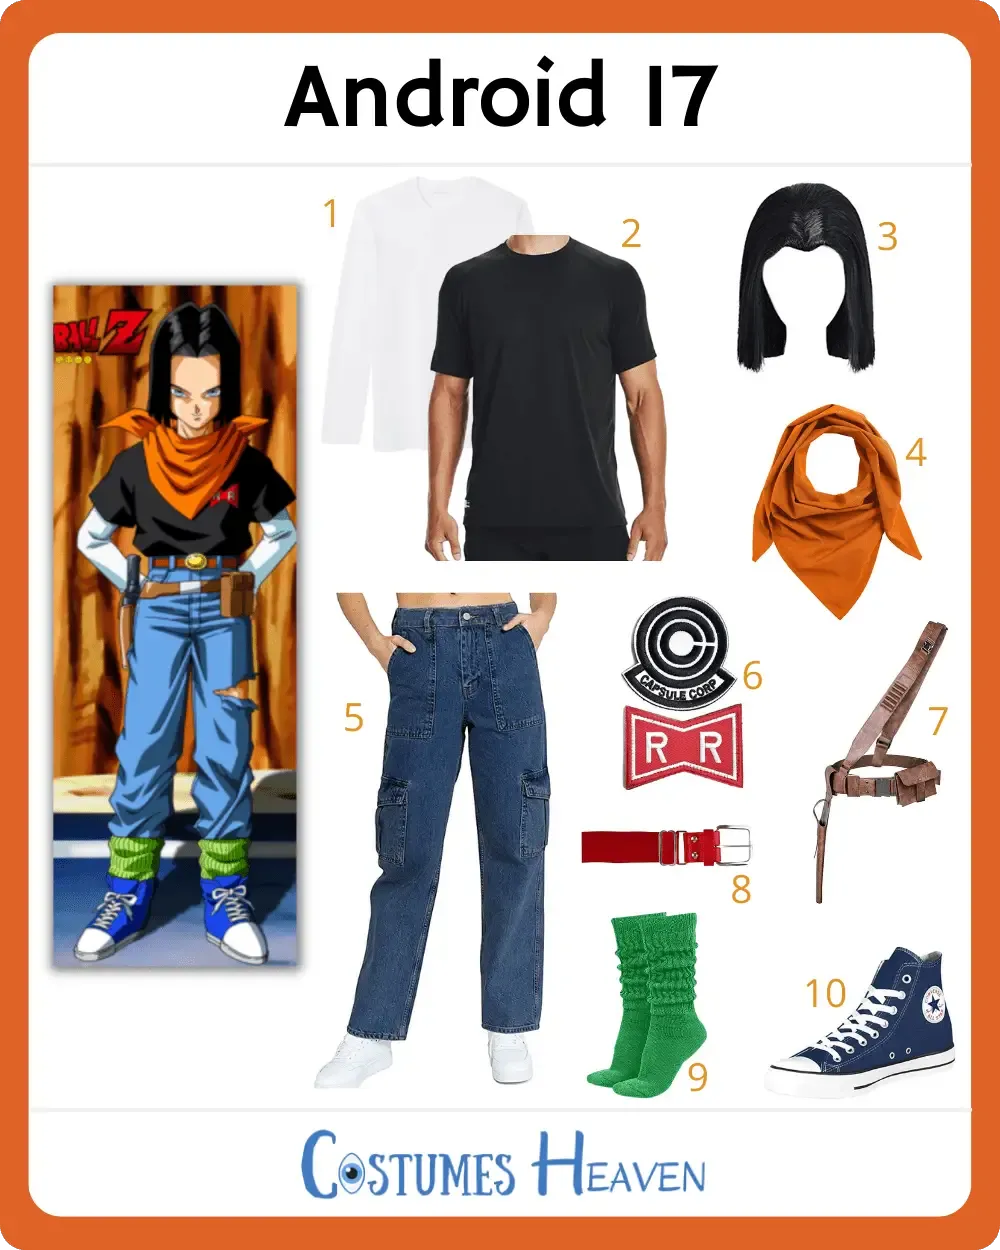 Android 17 Costume